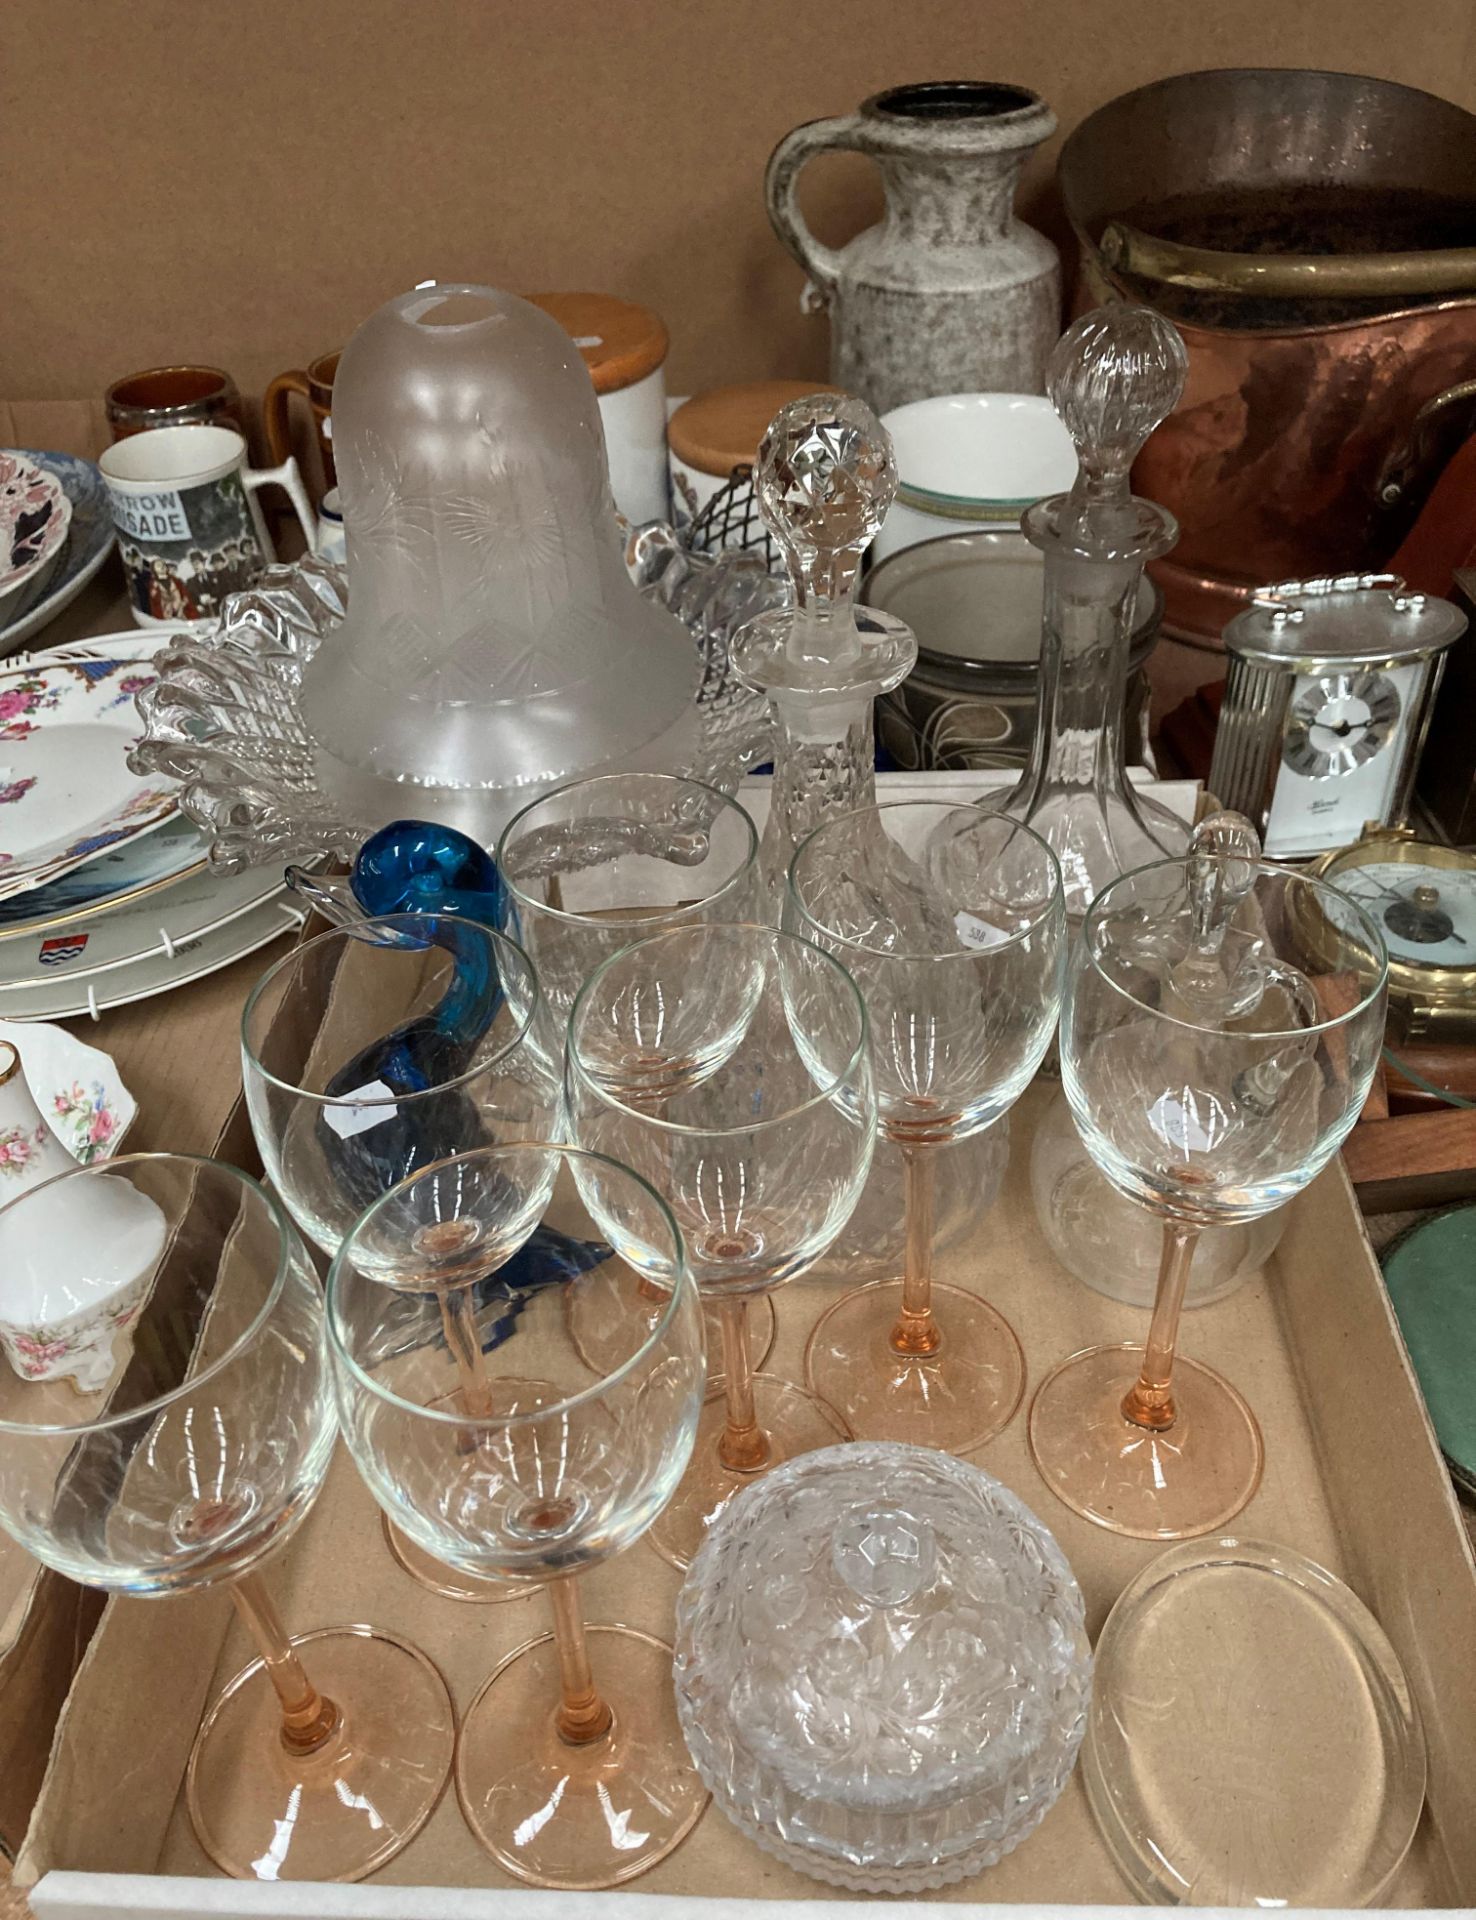 Contents to two small trays - glass decanters, glassware, kitchen jars, etc.